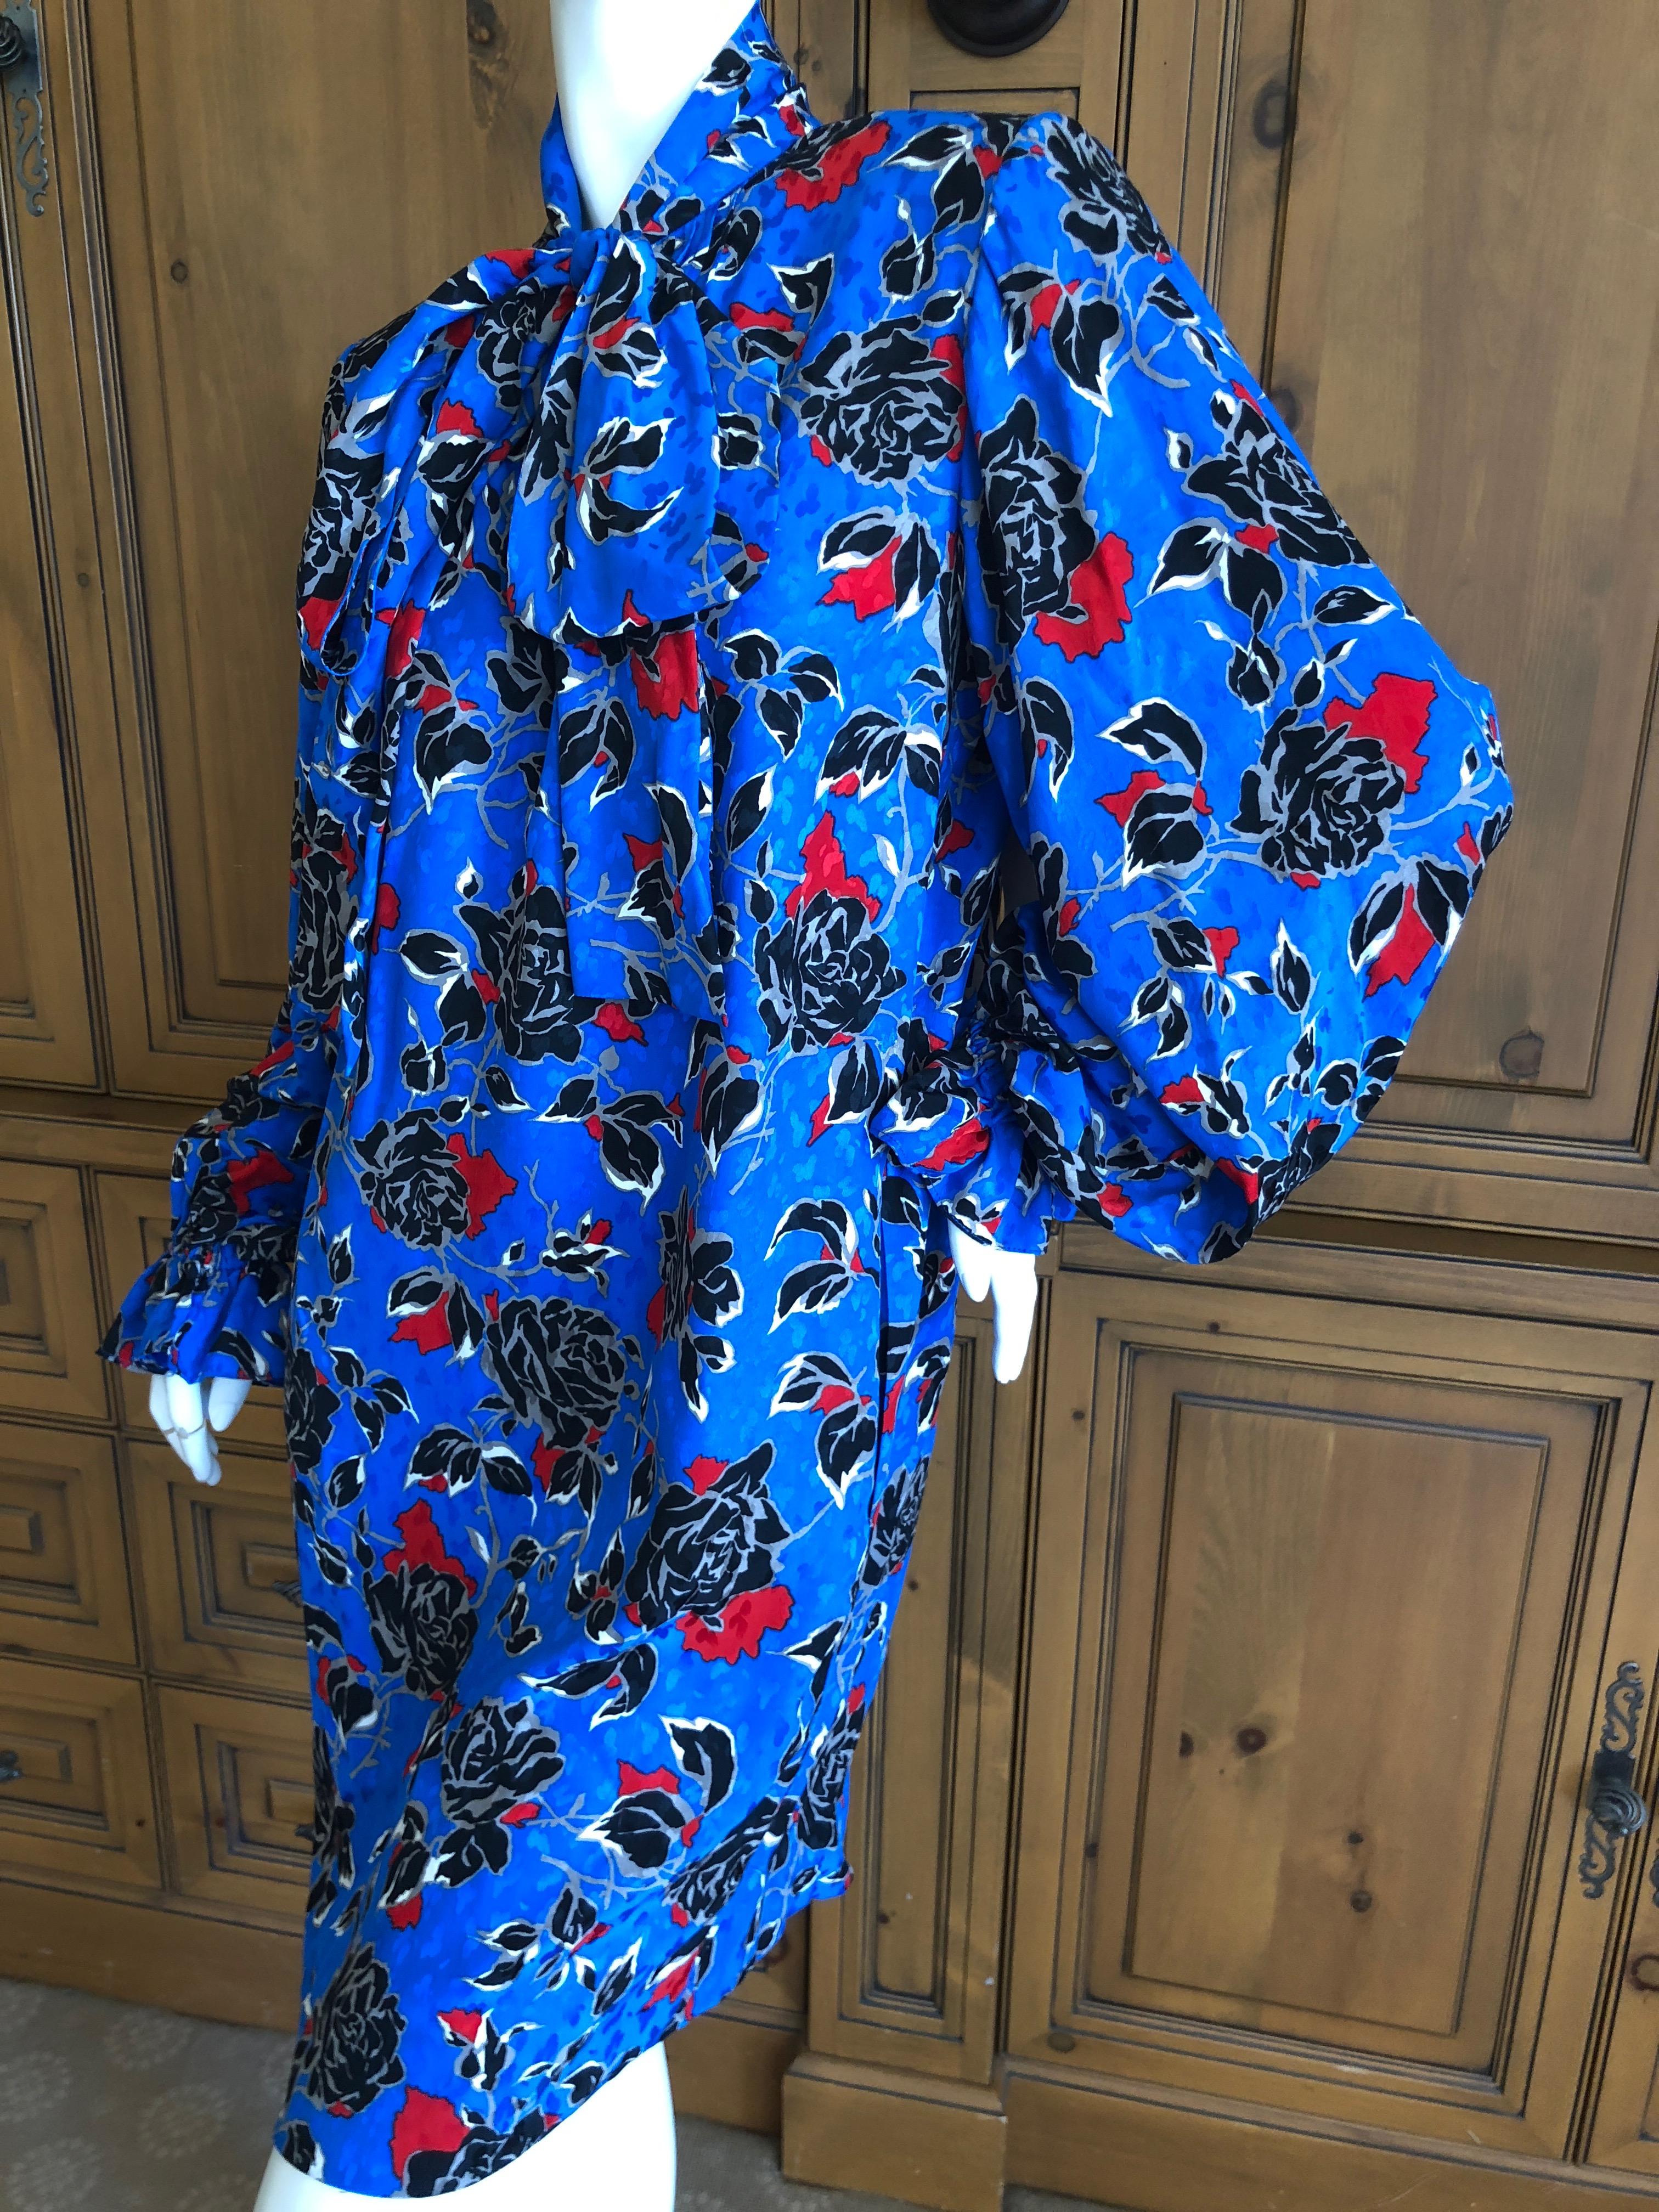 Yves Saint Laurent Rive Gauche 1970's Silk Day Dress with Keyhole and Bow
So delightfully French. Shoulder pads can be removed.
Size 38, cut blouson style it is very generous
Bust 46